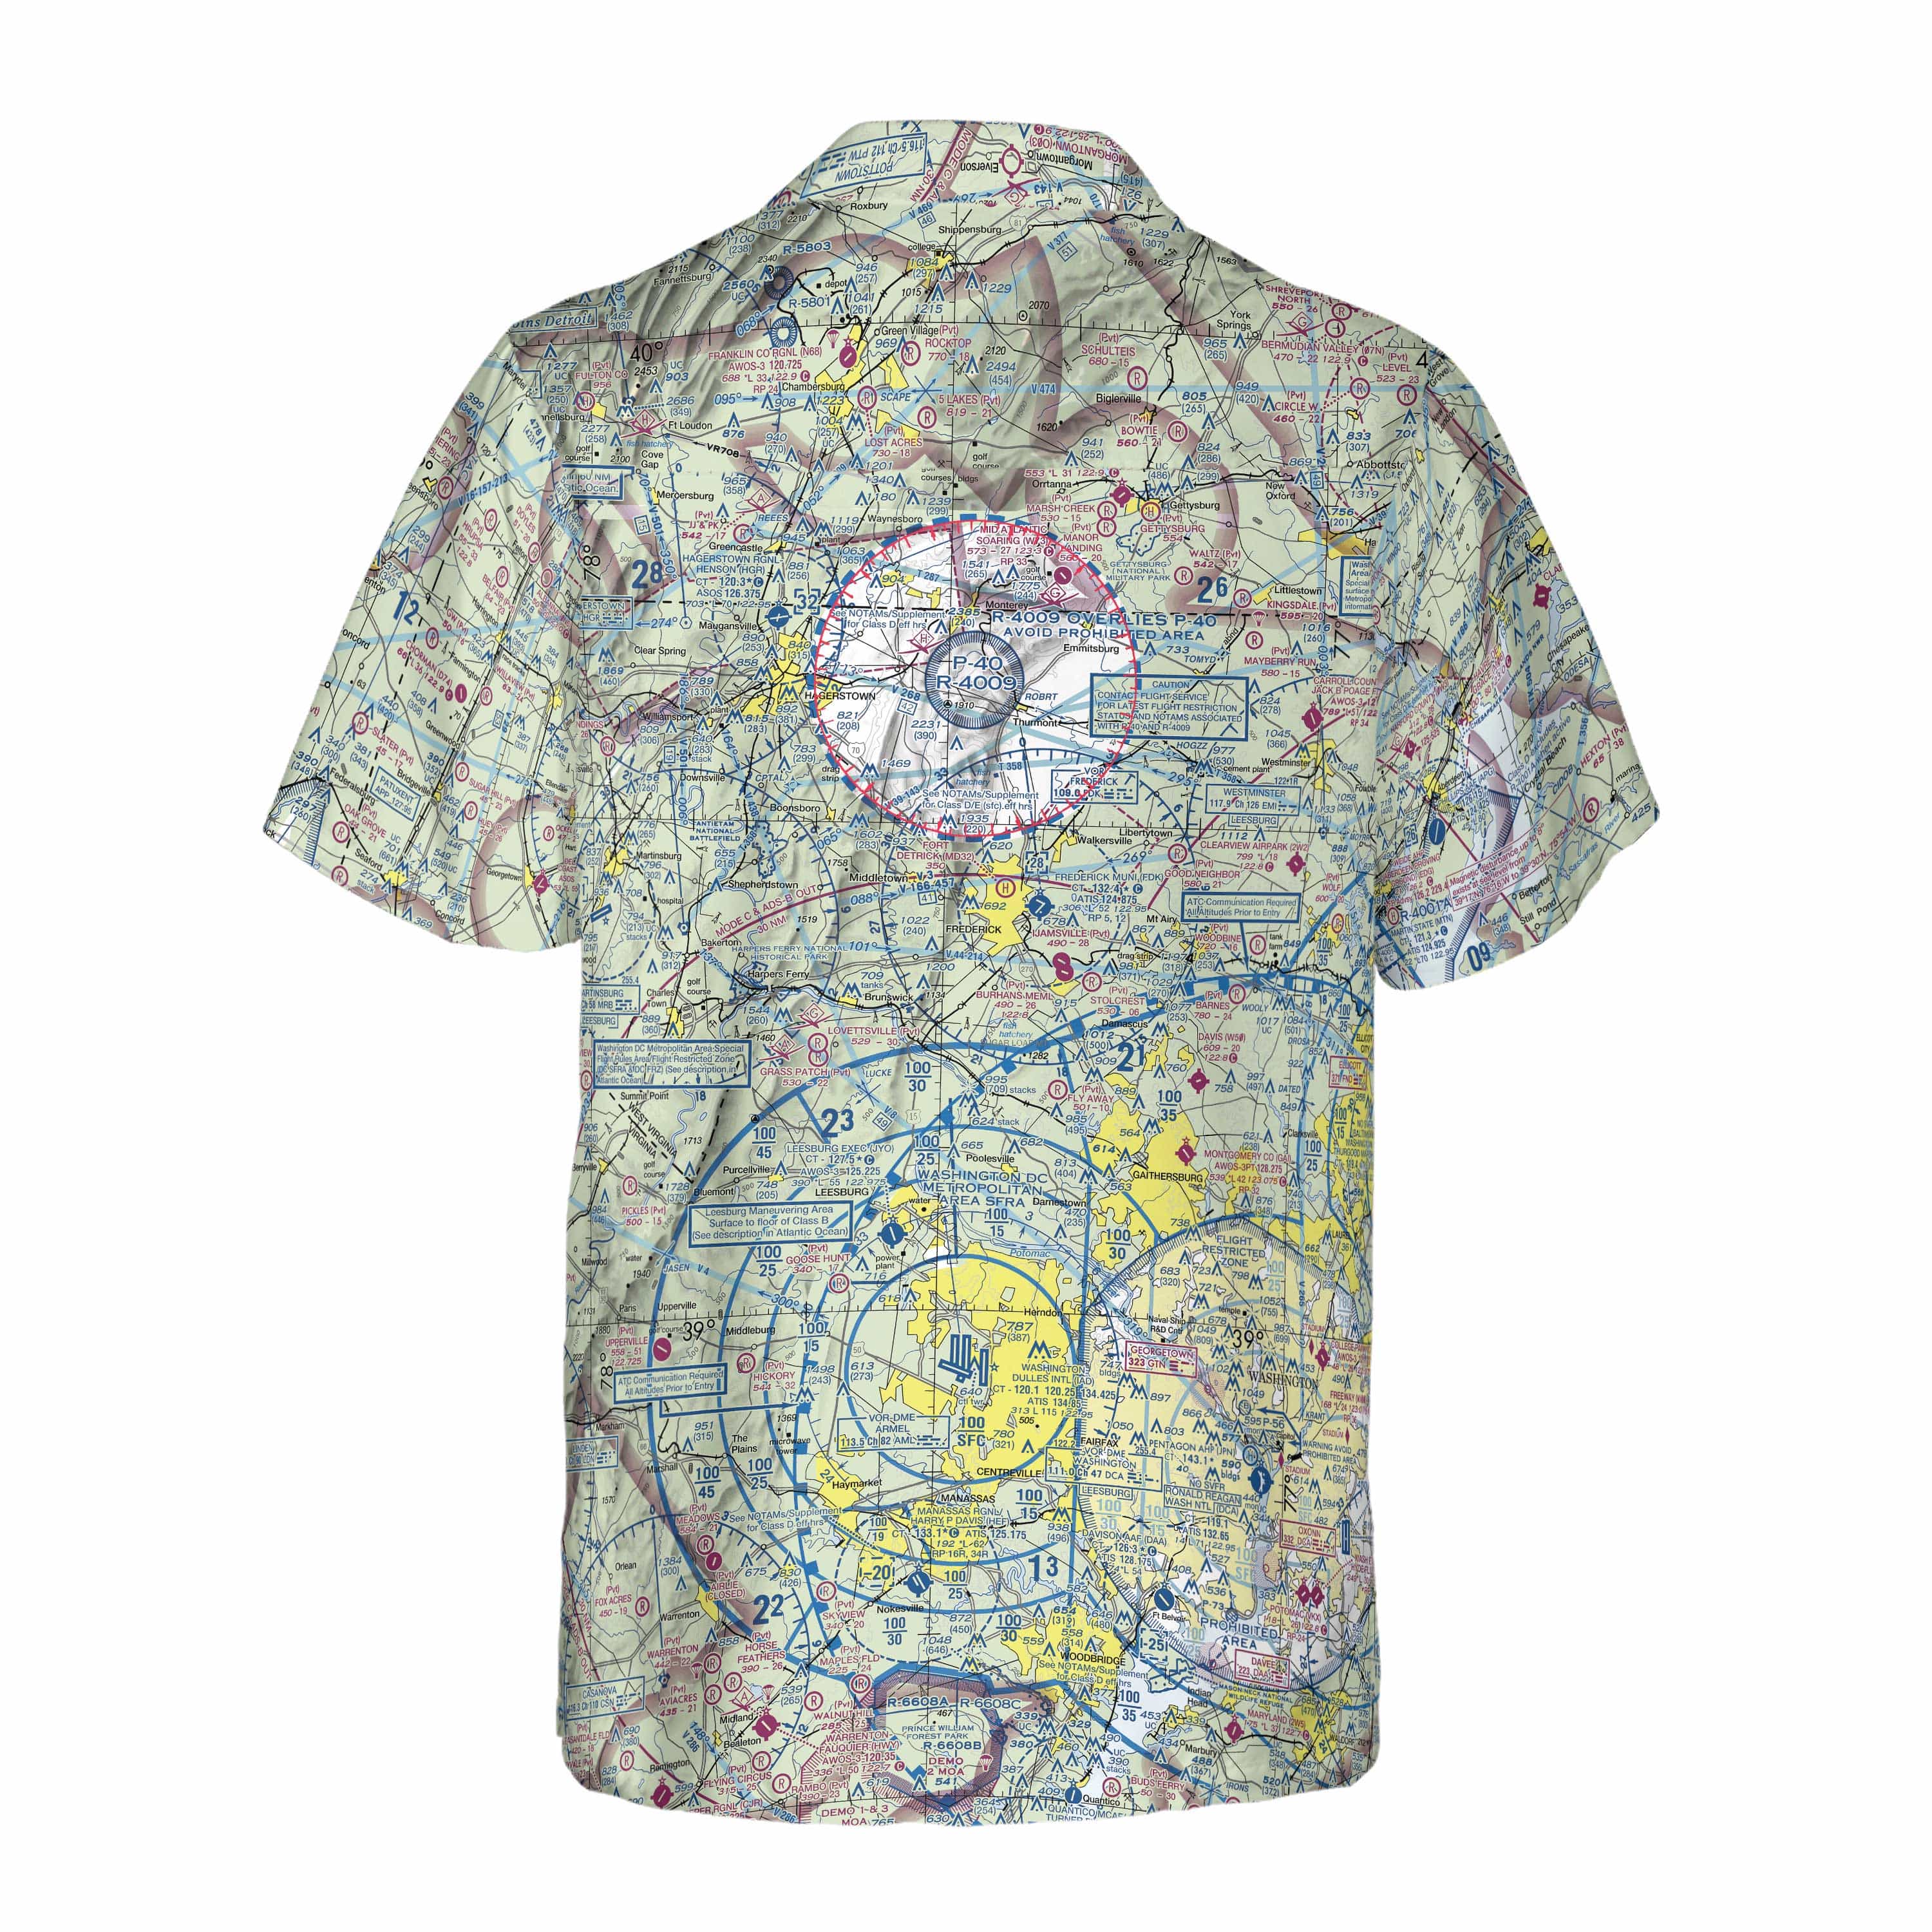 AOP Coconut Button Shirt The Leesburg to Camp David VFR Coconut Button Camp Shirt